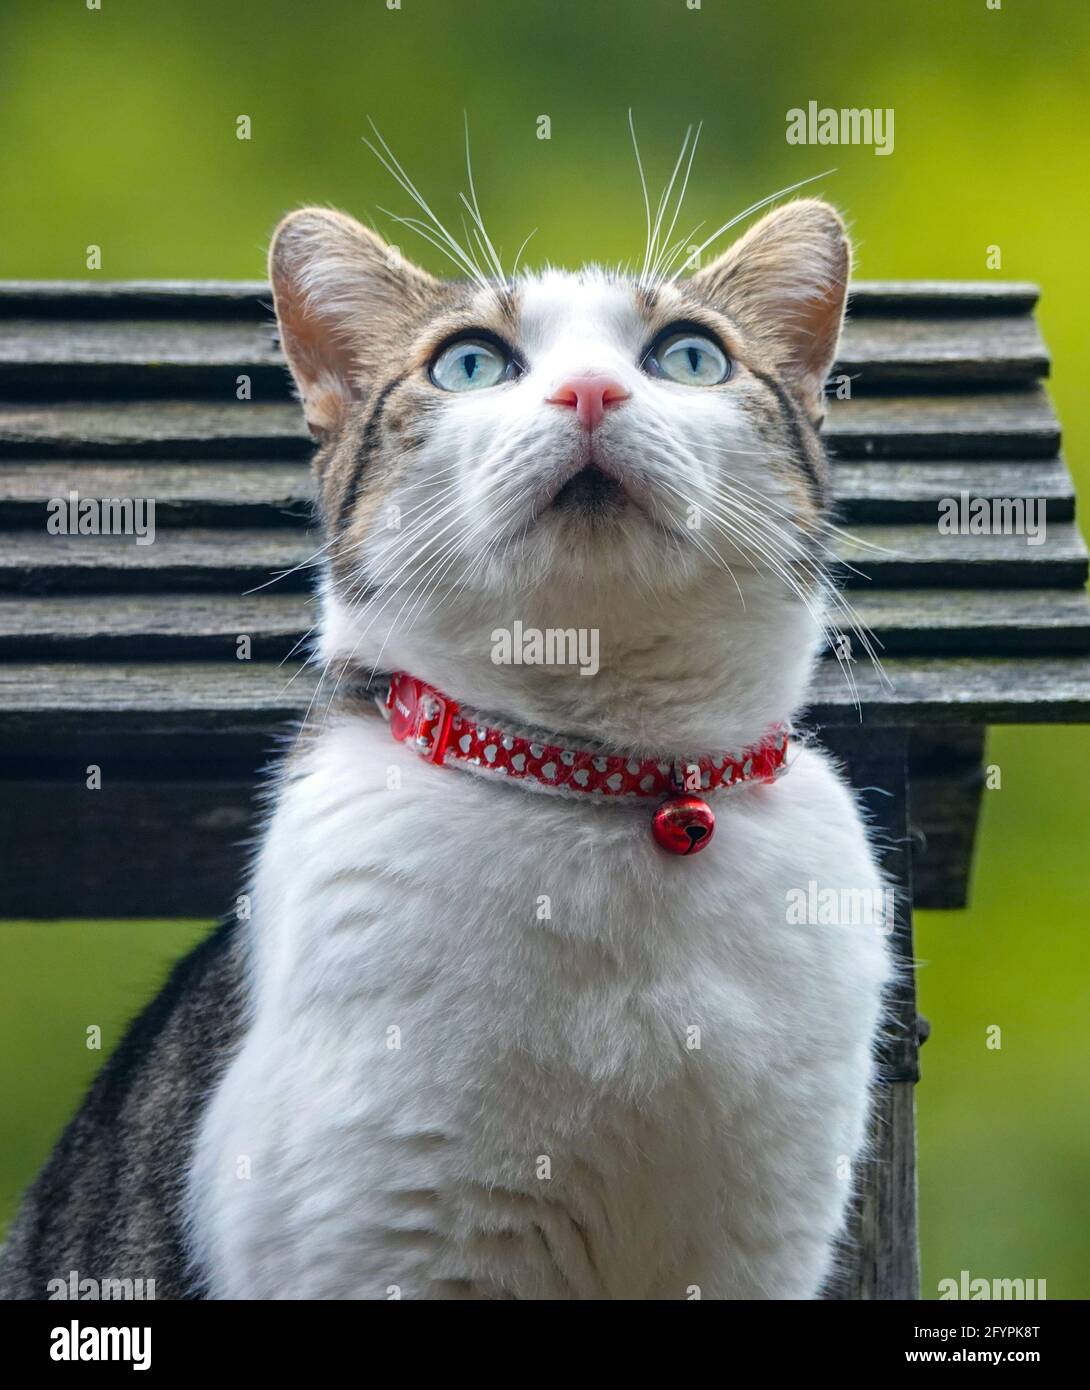 Close-up photograph of a tabby and white cat kitten with red collar and sitting in birdhouse and bell looking intently Stock Photo